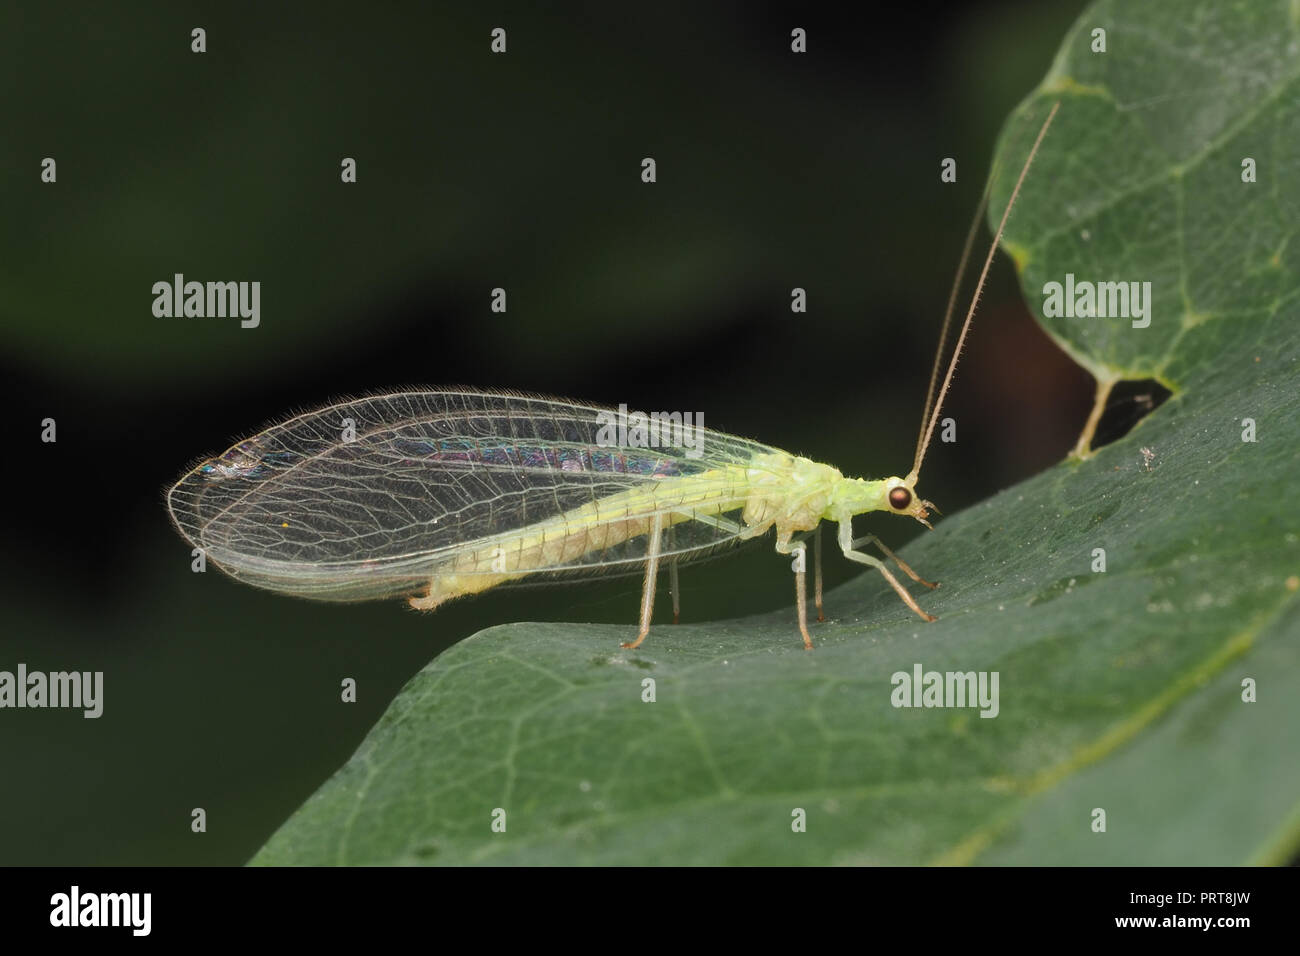 Green Lacewing perched on oak leaf. Tipperary, Ireland Stock Photo